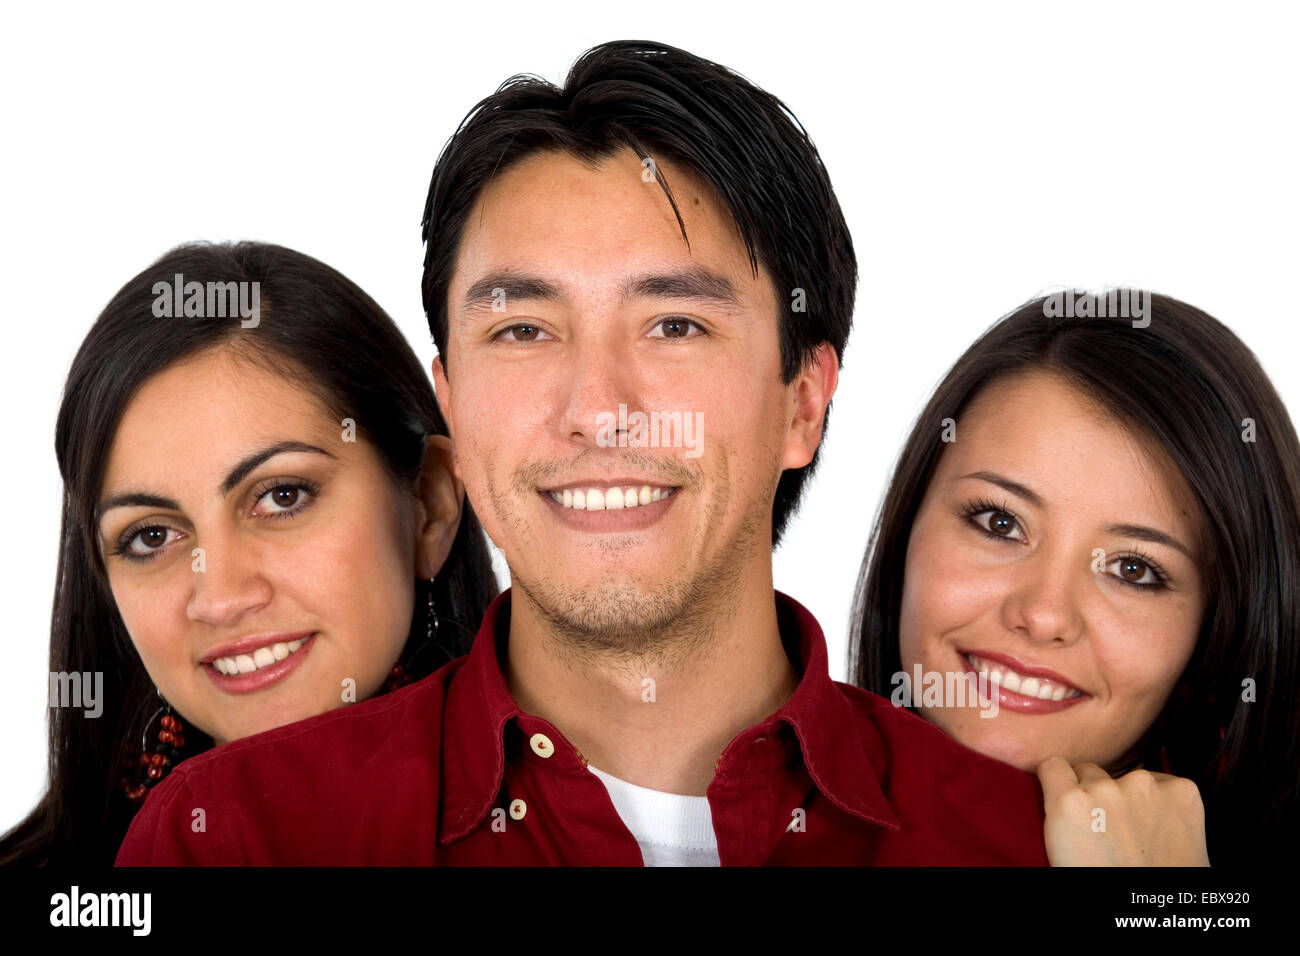 young man with two girl friends Stock Photo